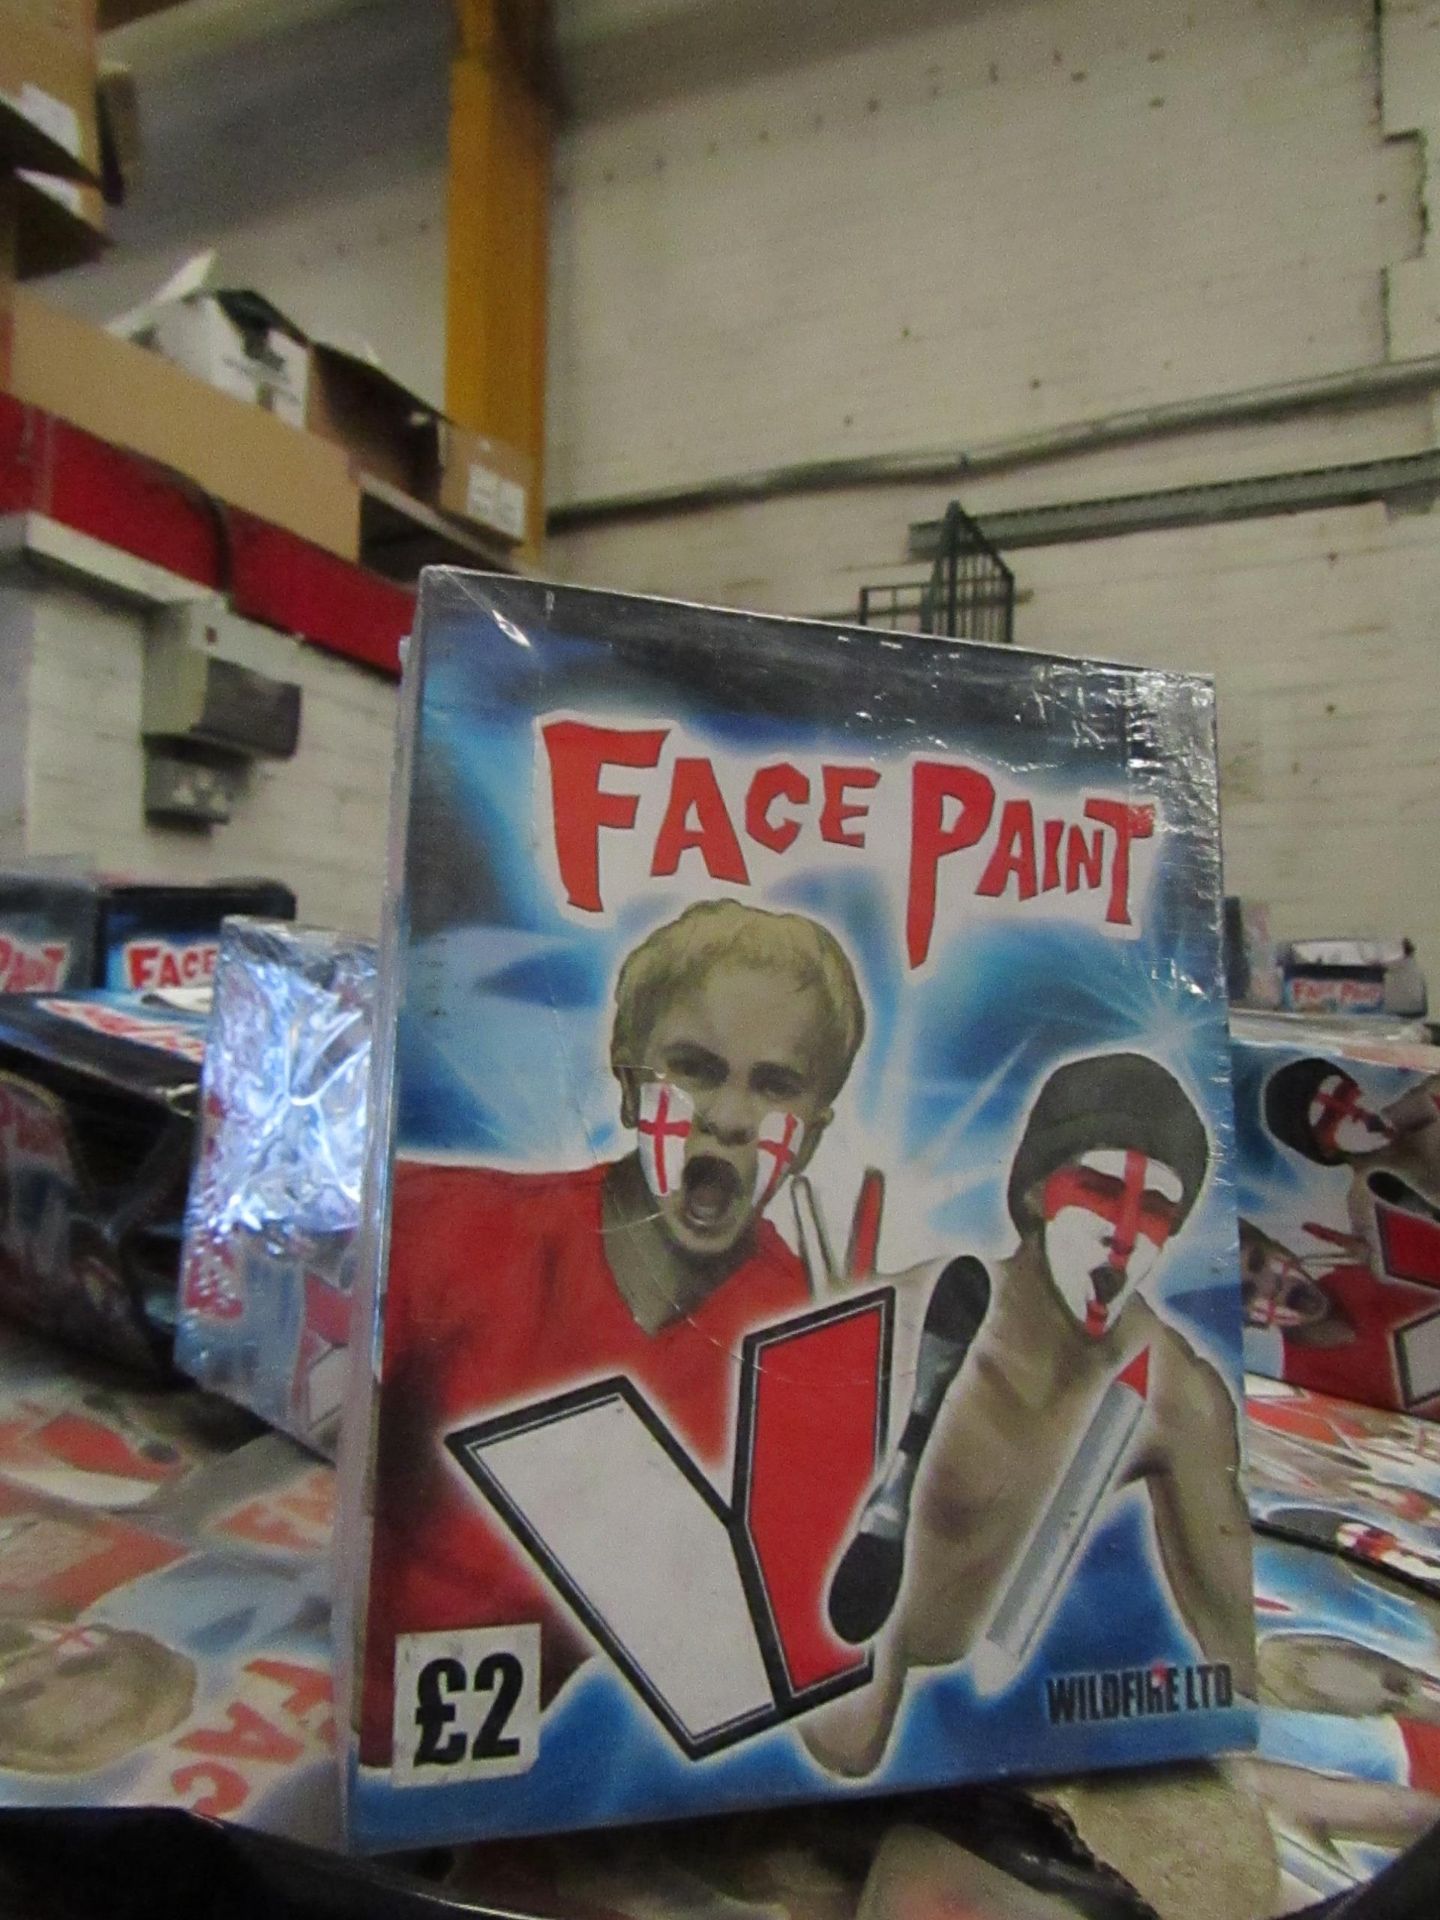 Approx 400x packs of 12 red and white face paint, all new and boxed.